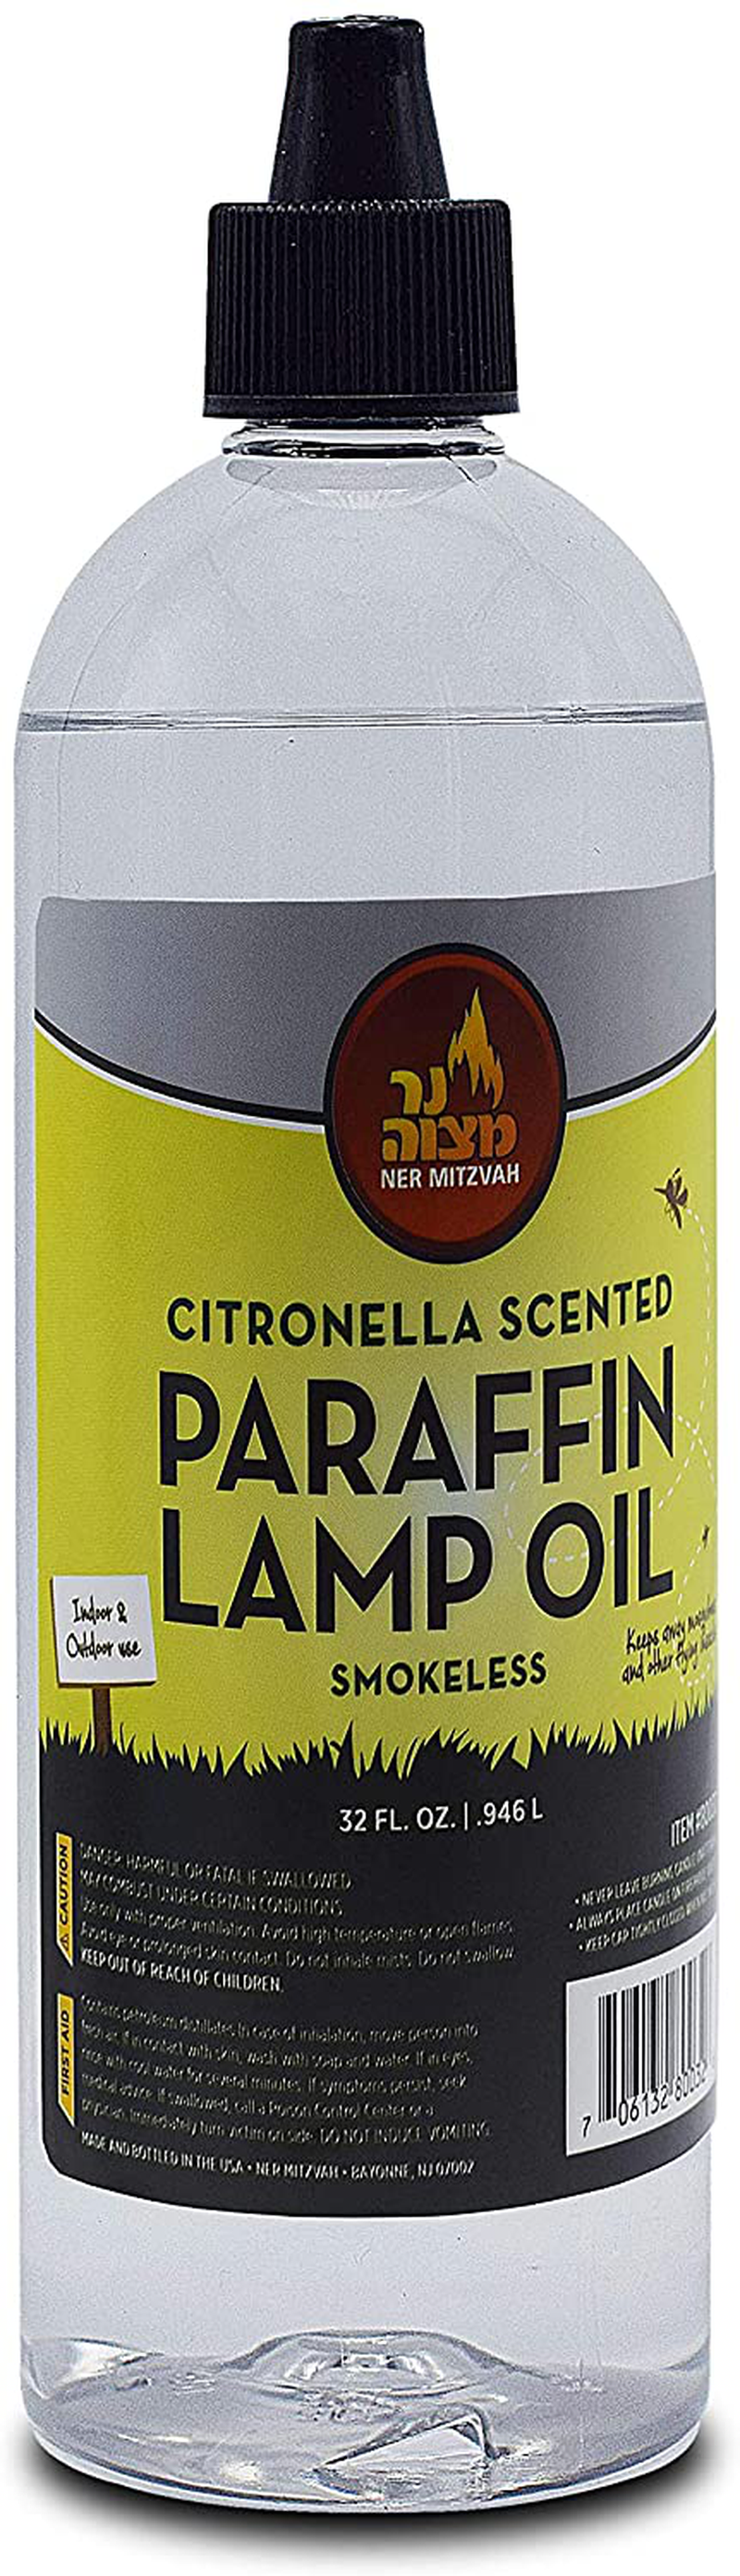 Citronella Scented Lamp Oil, 2 Liter - Smokeless and Odorless Insect and Mosquito Repellent Paraffin Lamp Oil for Indoor and Outdoor Lanterns, Torches, Oil Candle - by Ner Mitzvah Home & Garden > Lighting Accessories > Oil Lamp Fuel Ner Mitzvah 32 Ounces  